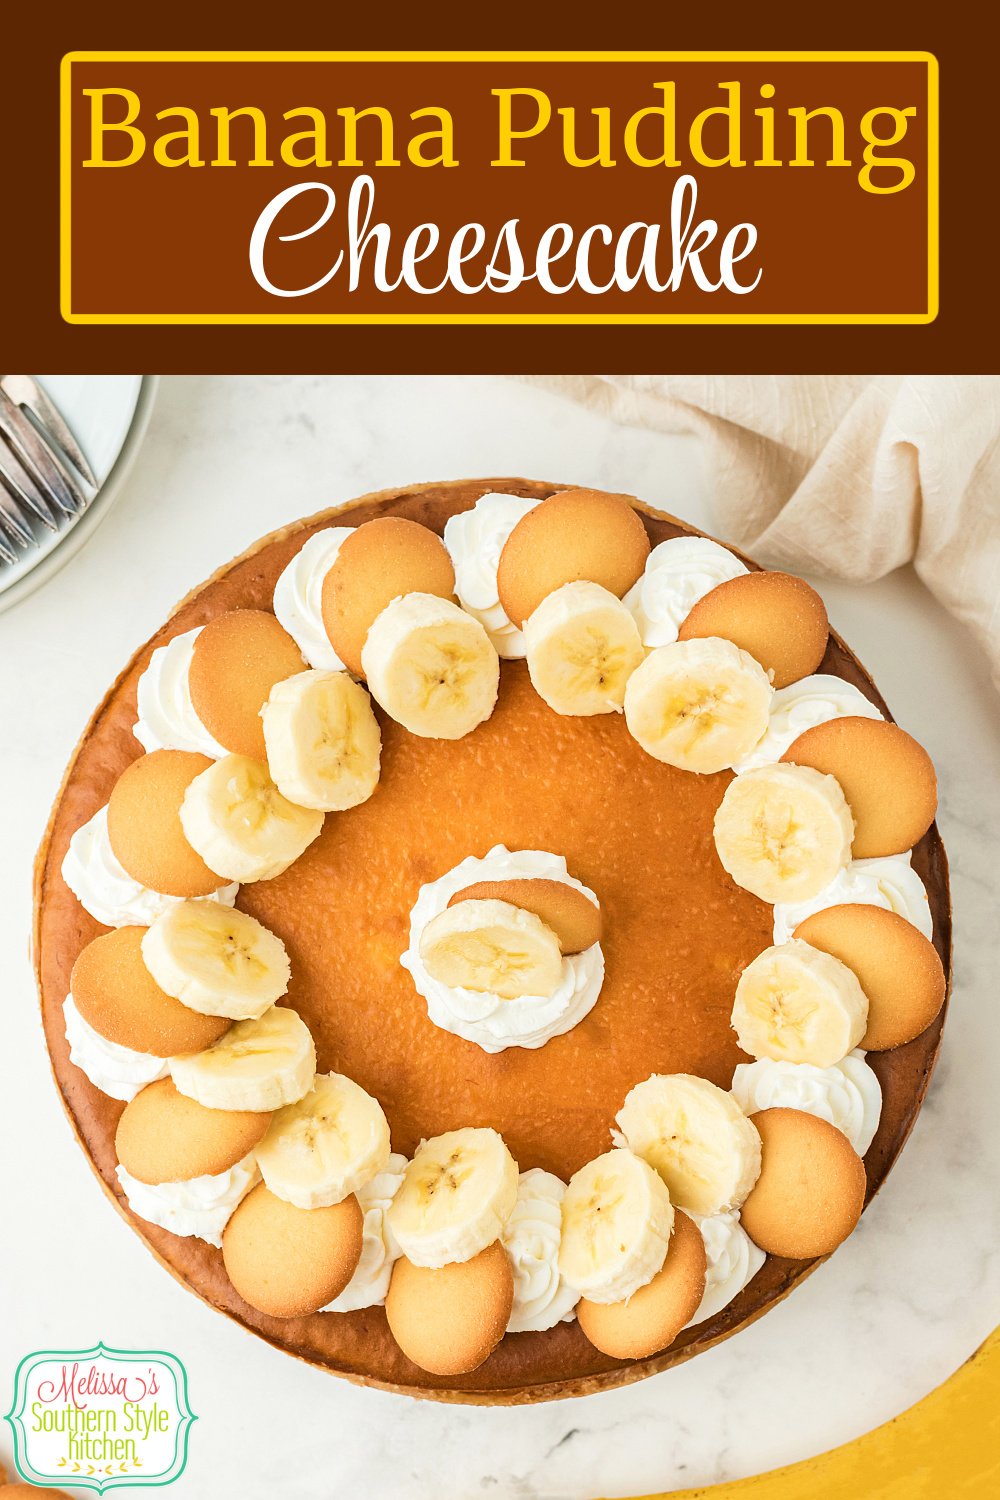 This Banana Pudding Cheesecake recipe combines a fluffy New York style cheesecake with Southern banana pudding. #bananapudding #bananapuddingcheesecake #cheesecakerecipes #easycheeecakerecipe #desserts #southernrecipes #southerndesserts via @melissasssk